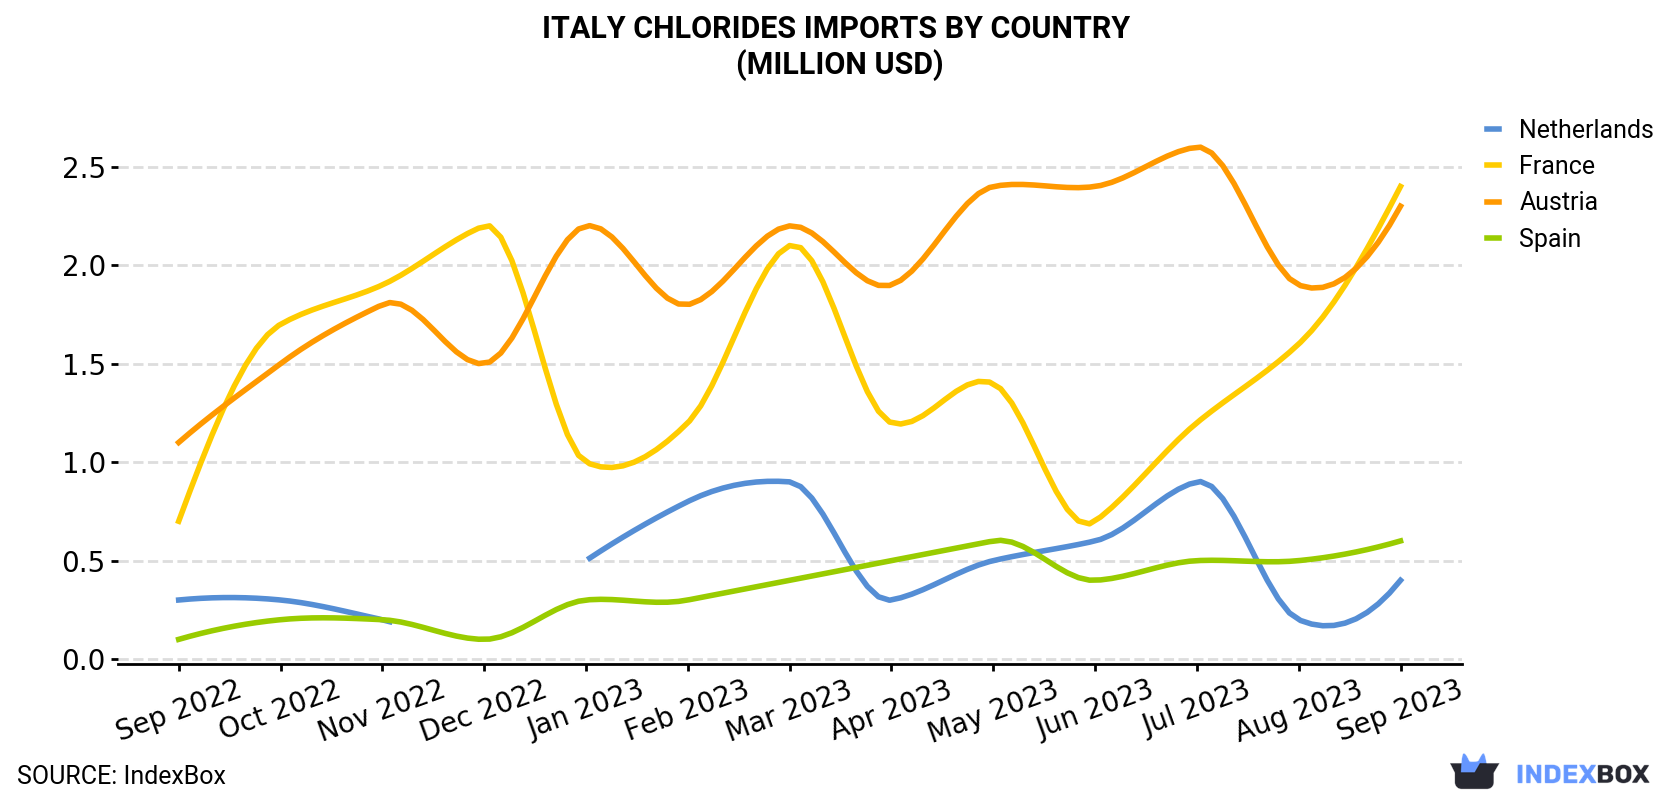 Italy Chlorides Imports By Country (Million USD)